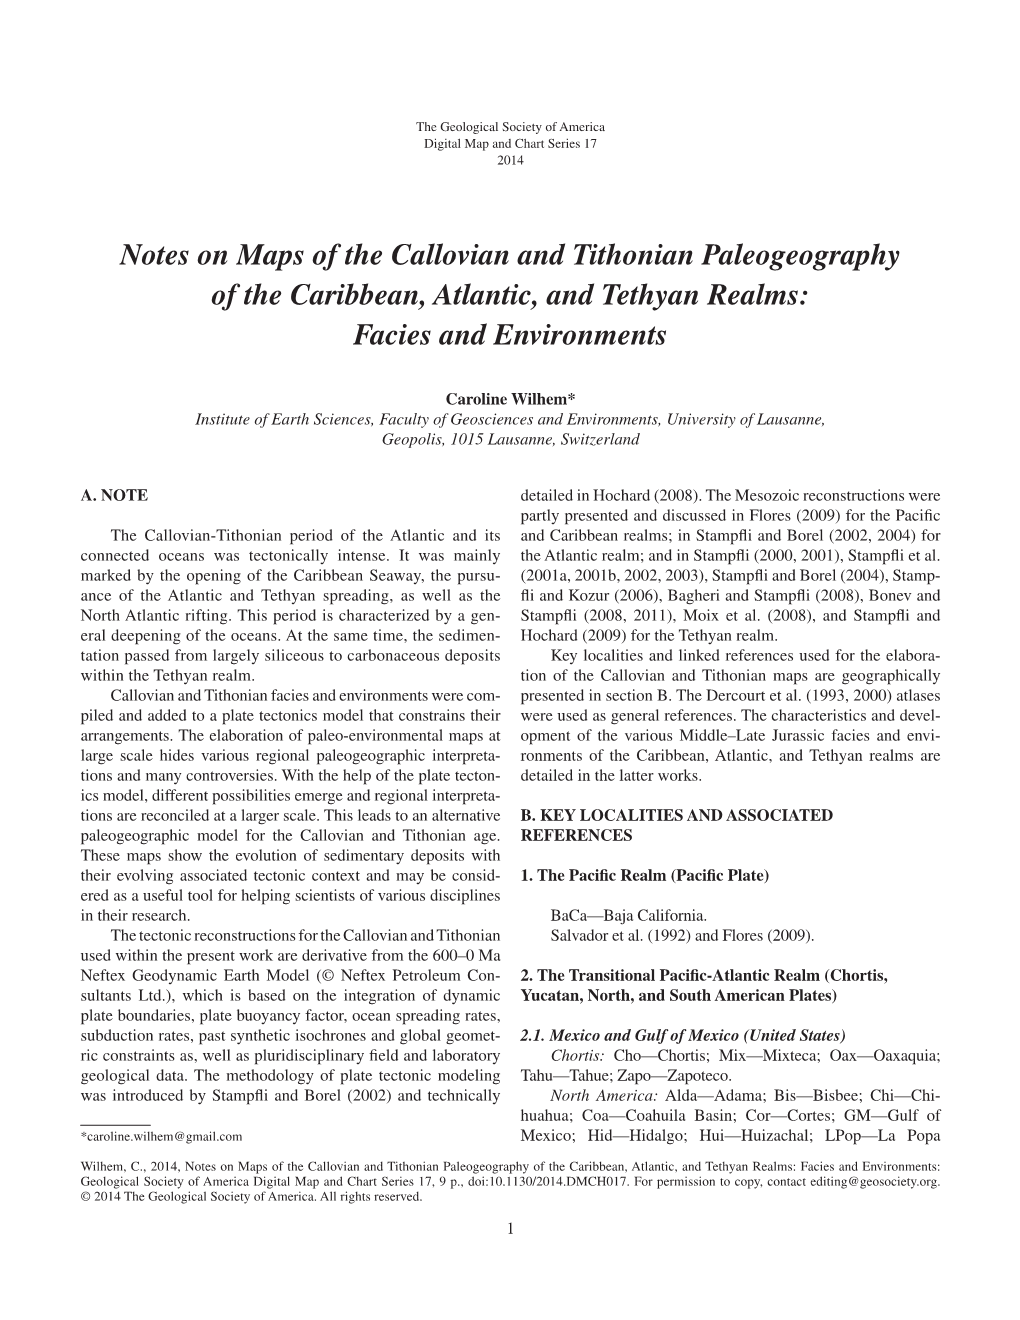 Notes on Maps of the Callovian and Tithonian Paleogeography of the Caribbean, Atlantic, and Tethyan Realms: Facies and Environments